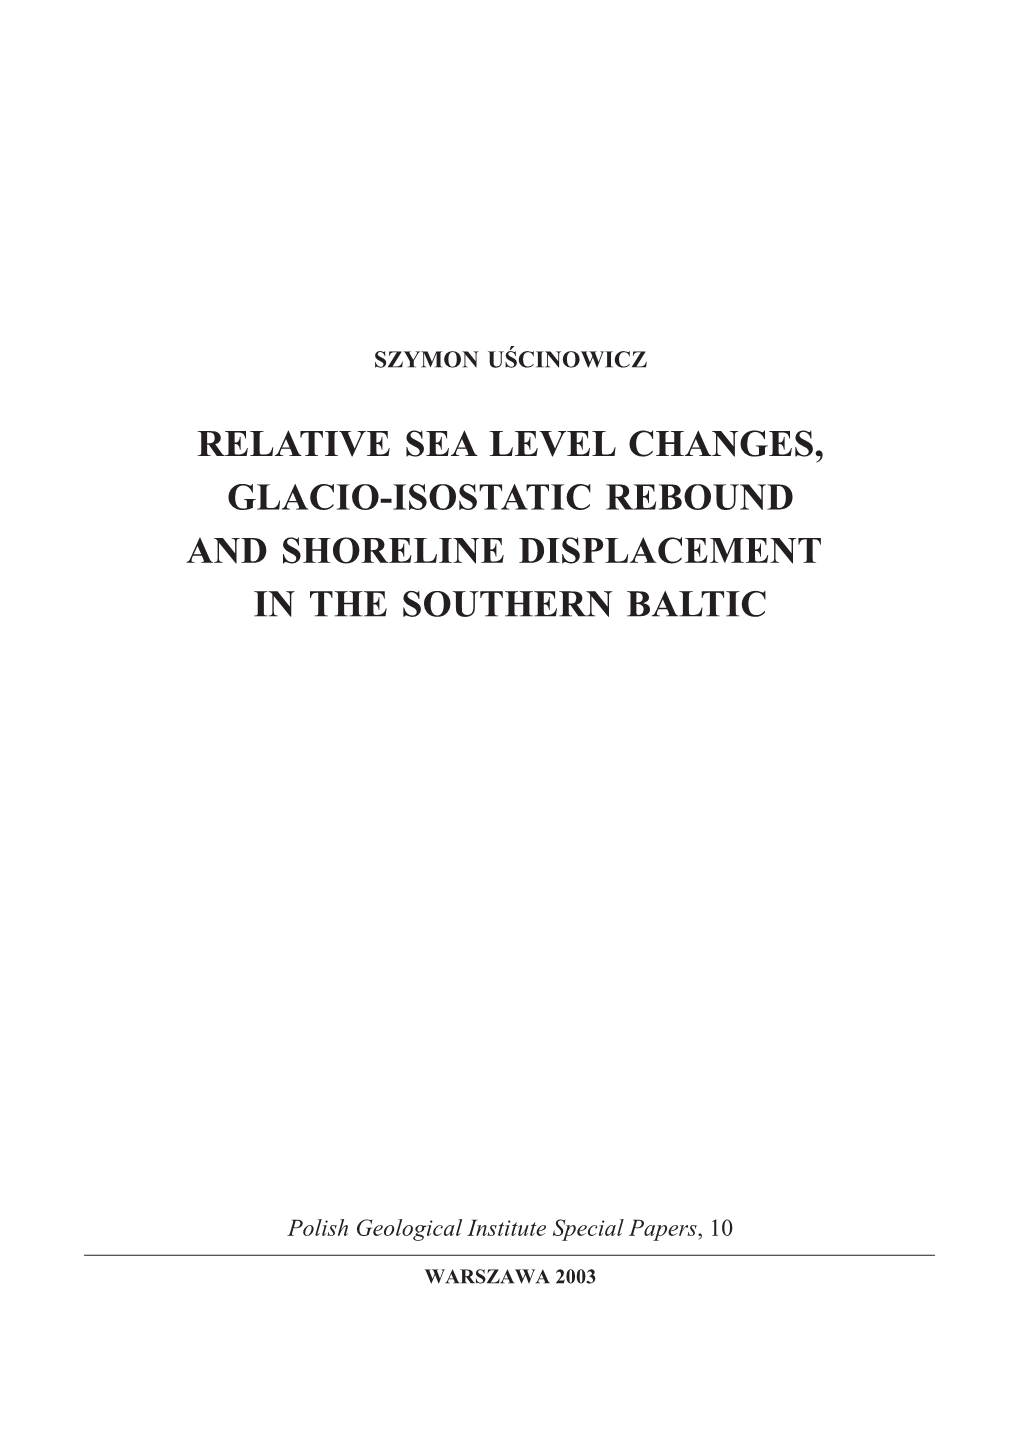 Relative Sea Level Changes, Glacio-Isostatic Rebound and Shoreline Displacement in the Southern Baltic